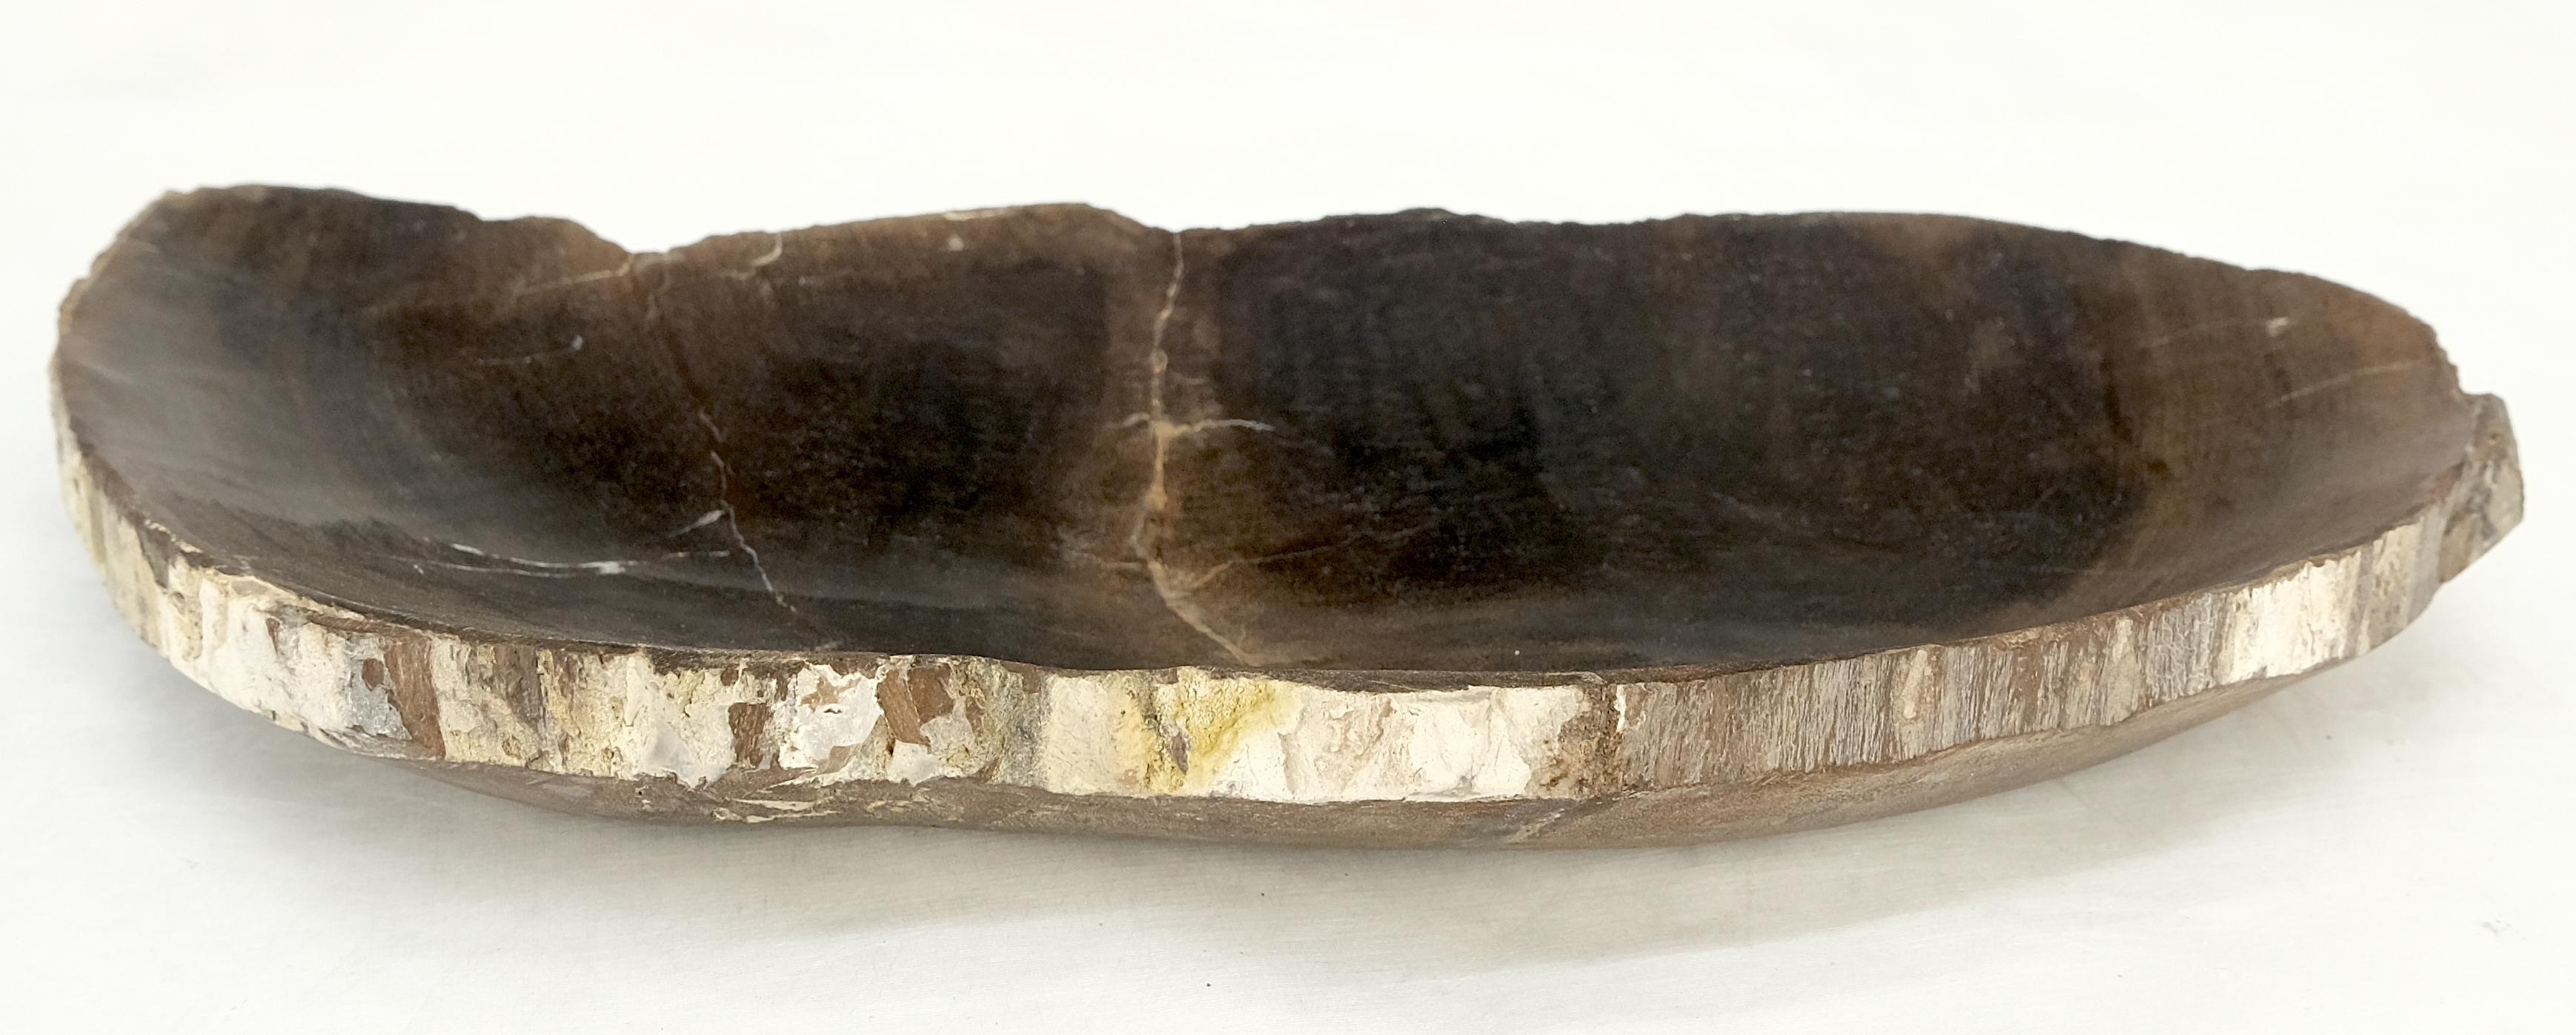 Indonesian Petrified Wood Oyster Shape Solid Black Elongated Bowl Dish Large Plate Ashtray For Sale